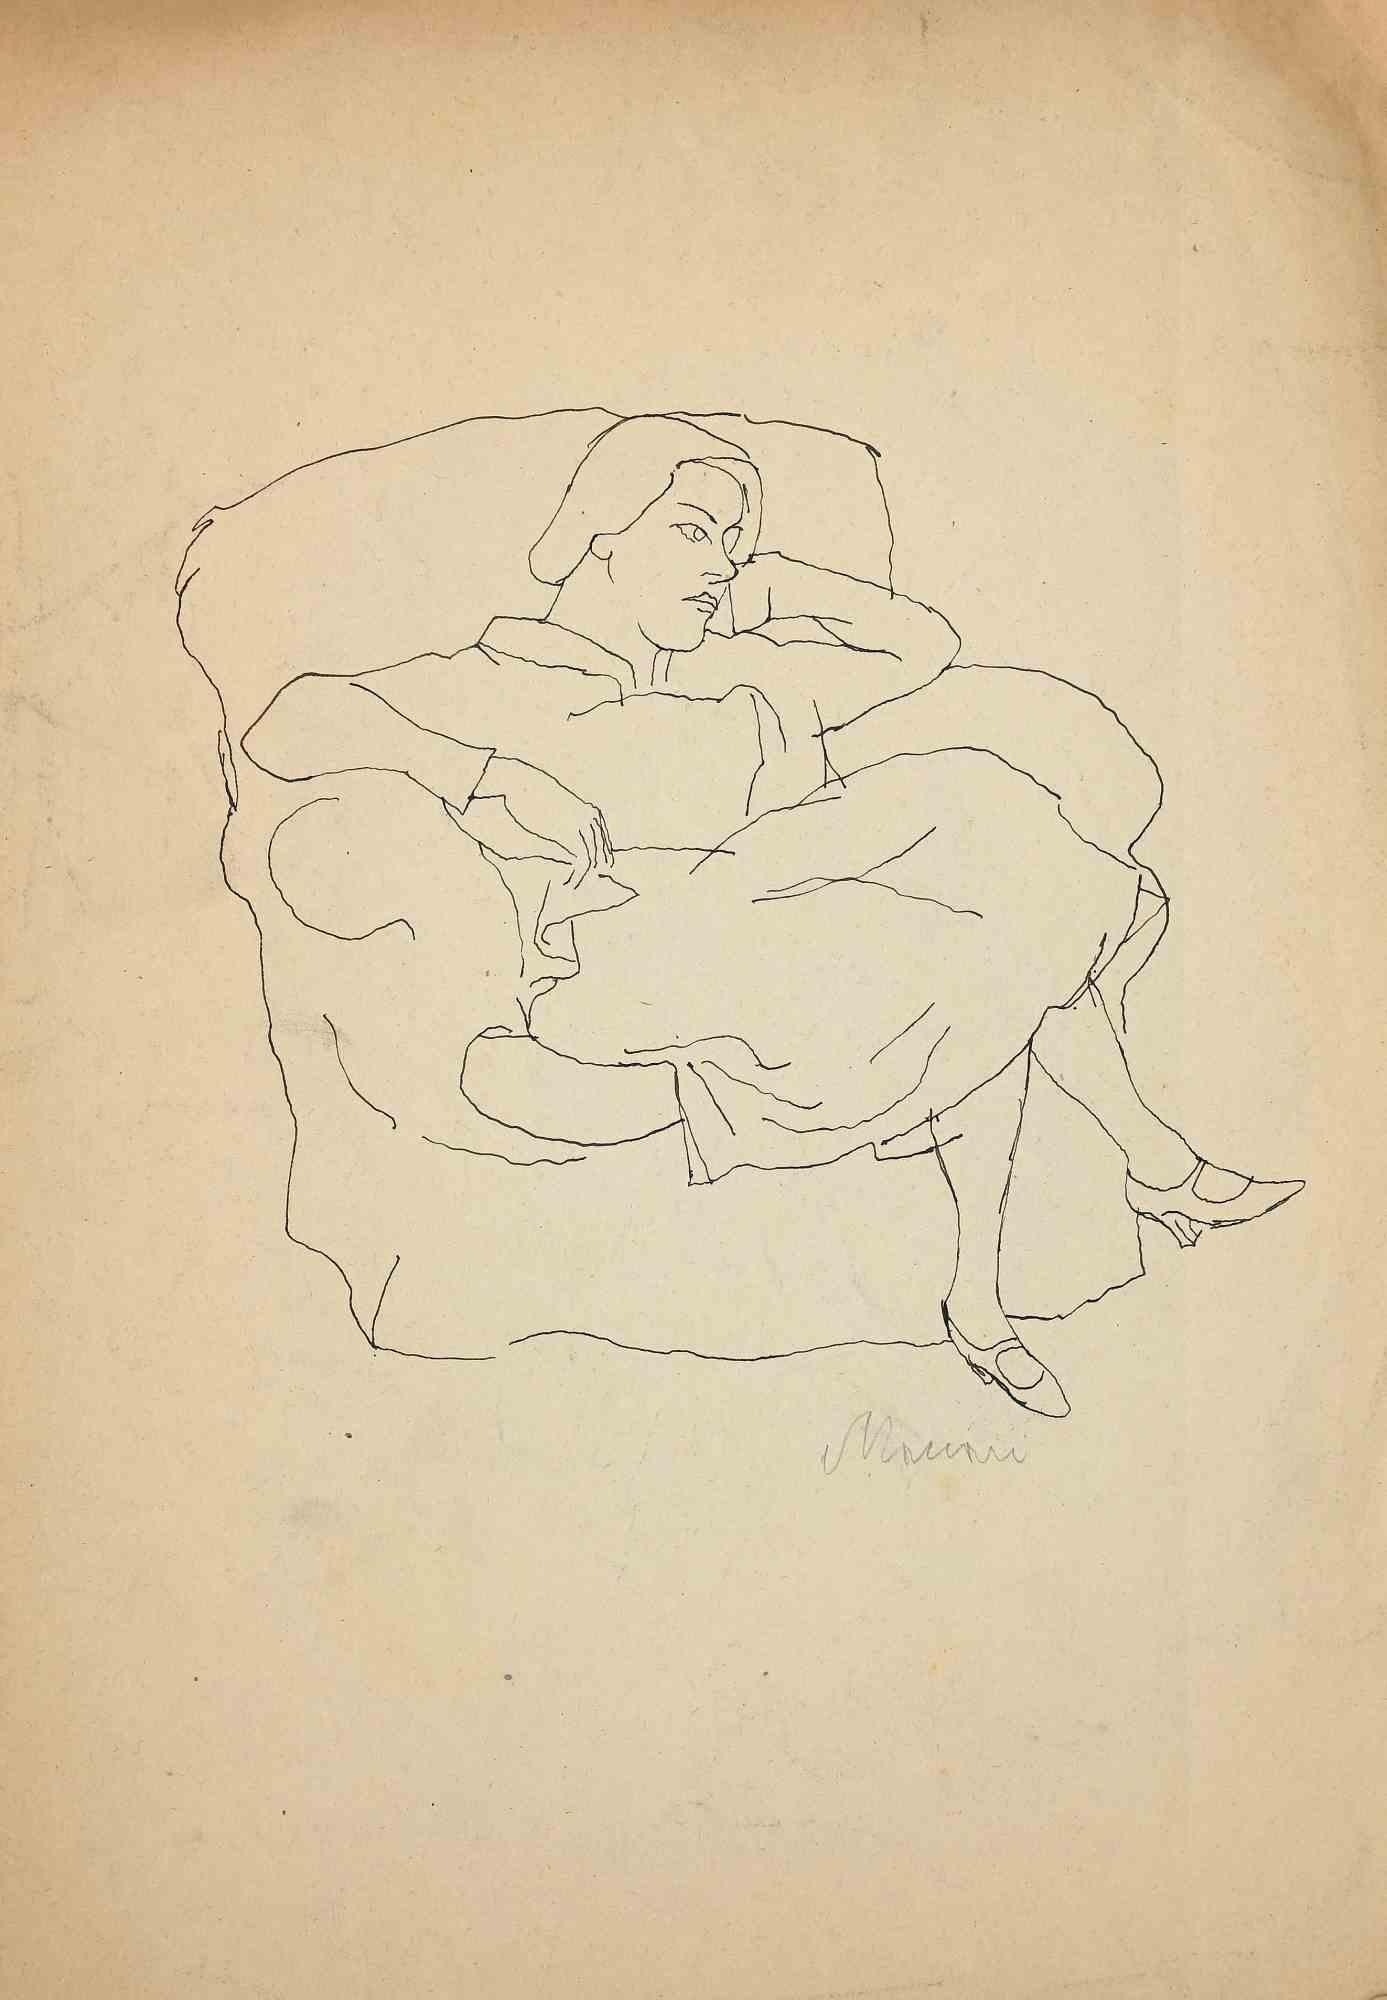 Figure is an original Pencil Drawing and Watercolour realized by Mino Maccari in mid-20th century.

Good condition on a yellowed paper.

Hand-signed by the artist with pencil.

Mino Maccari (1898-1989) was an Italian writer, painter, engraver and